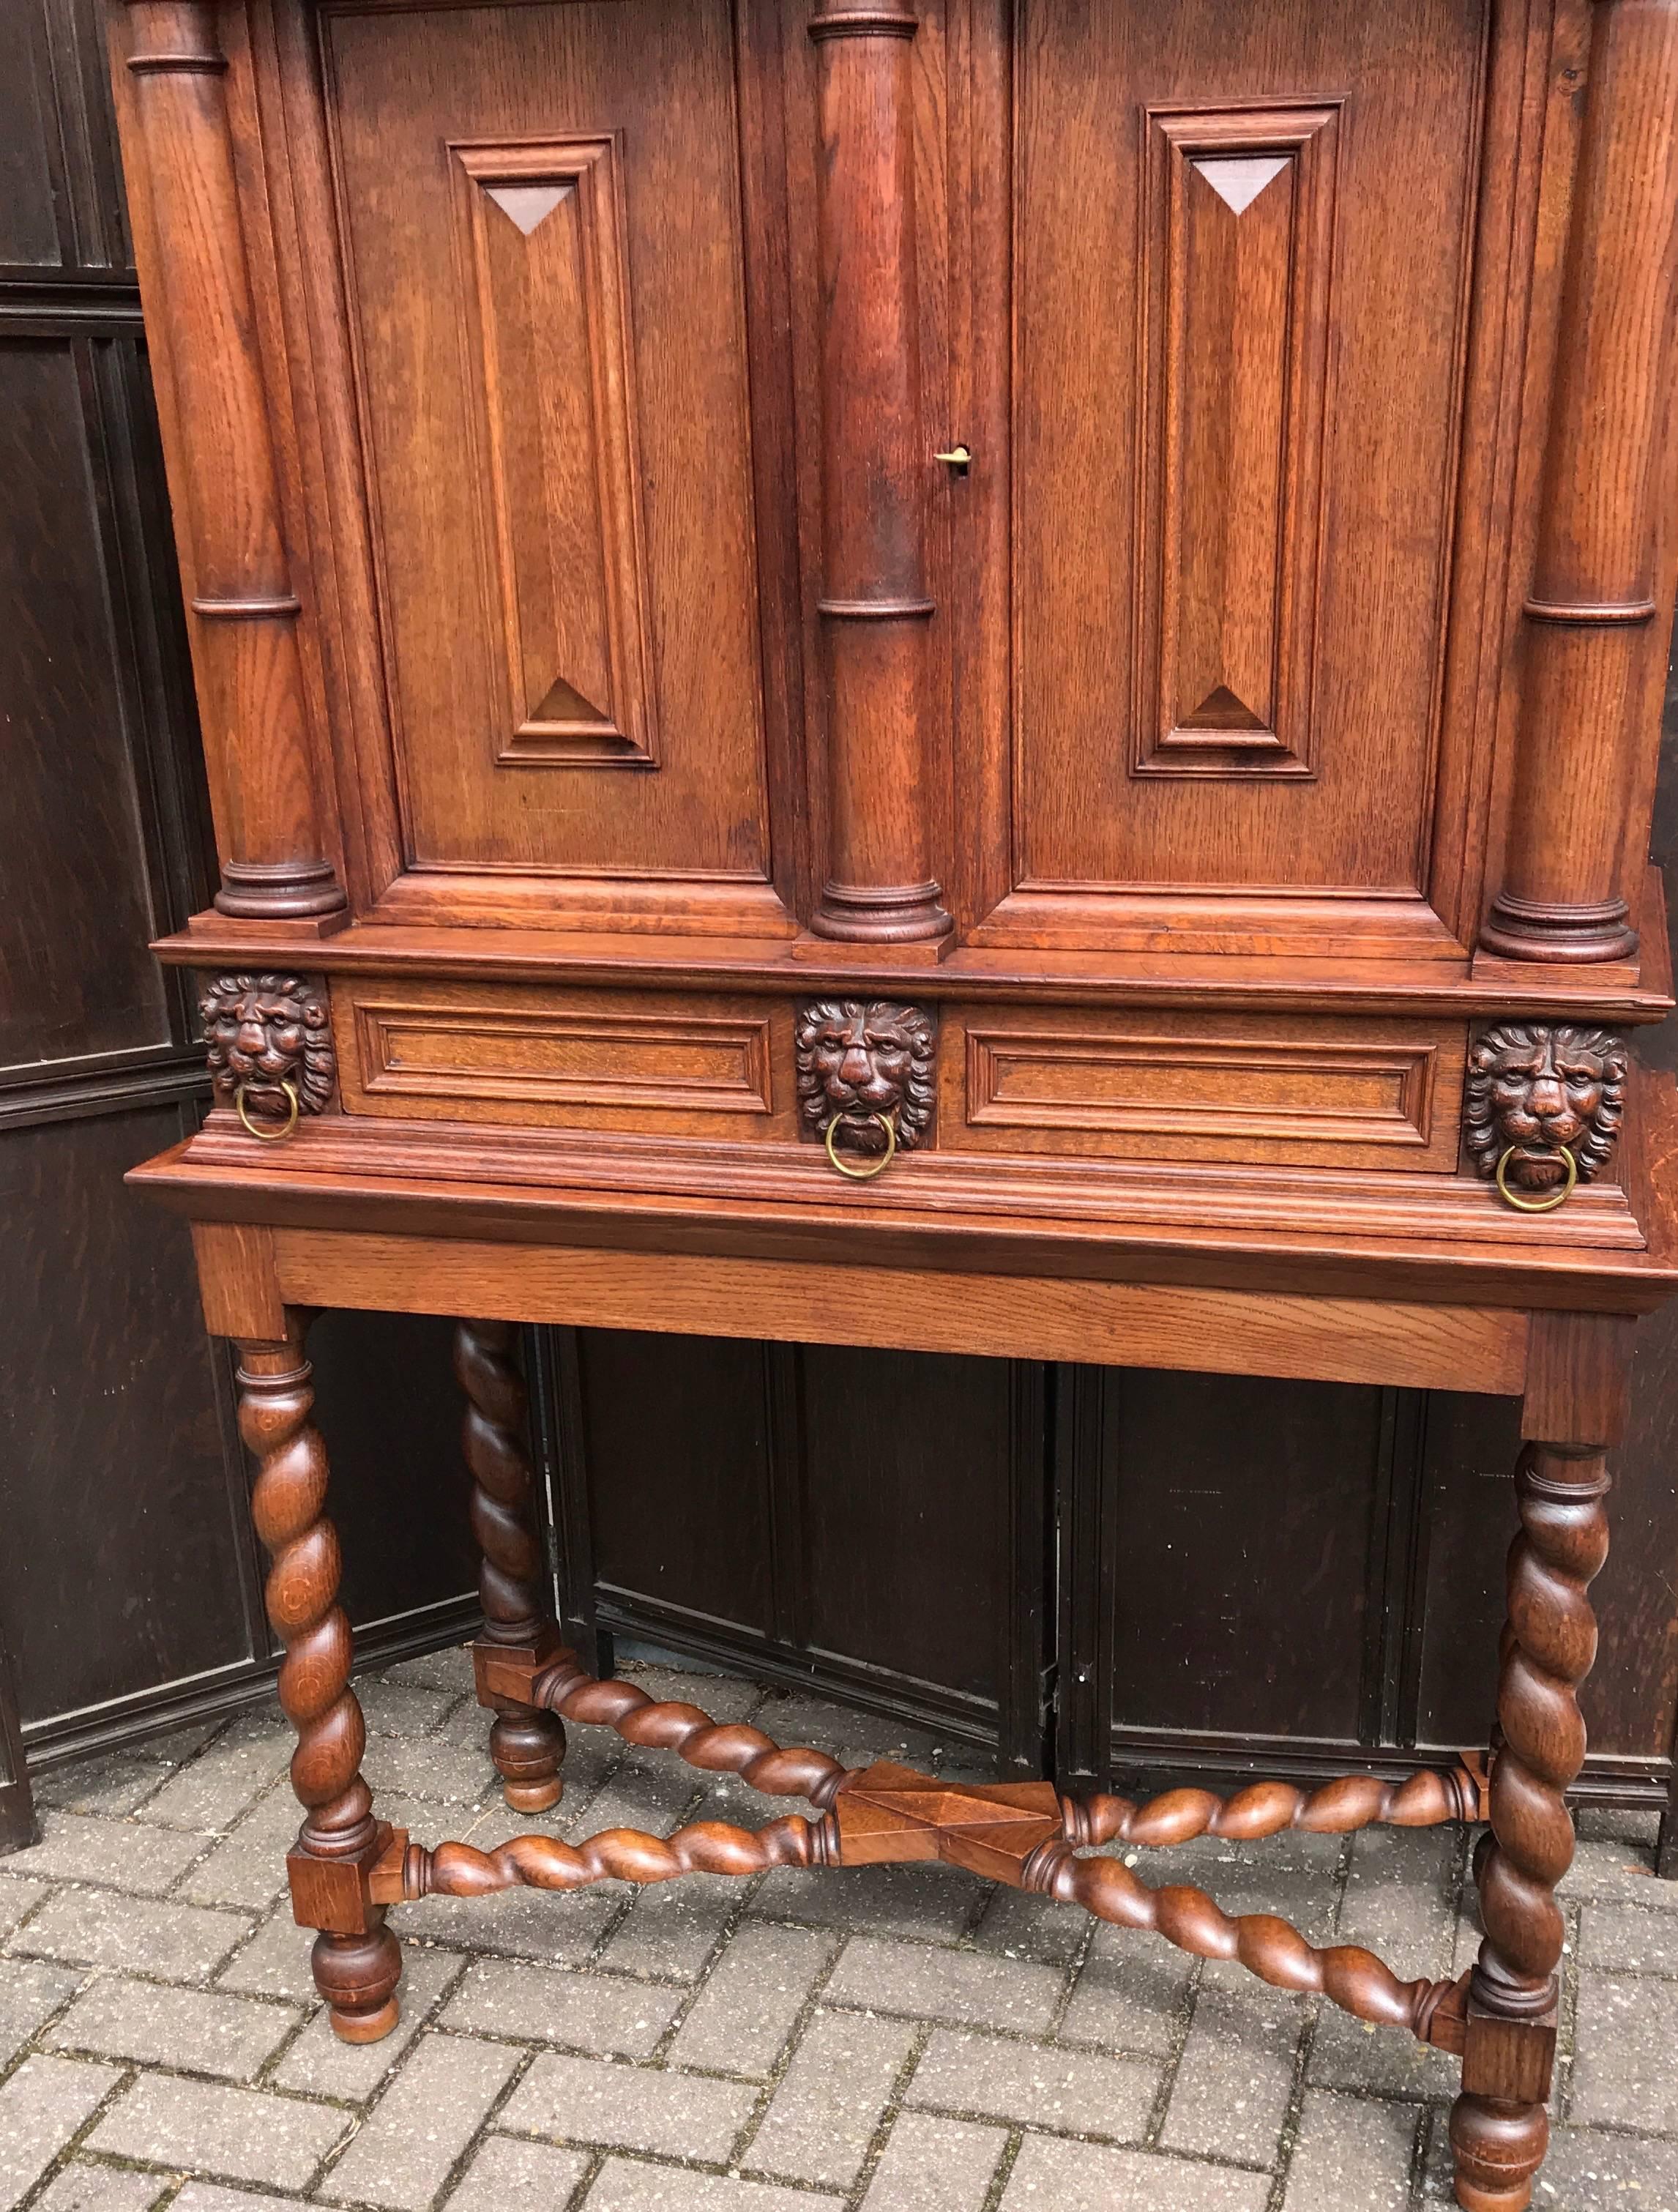 Practical size and beautiful quality cupboard with hidden drawer.

This handcrafted and solid tiger oak cabinet is in very good condition. We cannot find a makers name, but this is most certainly the work of a skilled cabinet maker. This impressive